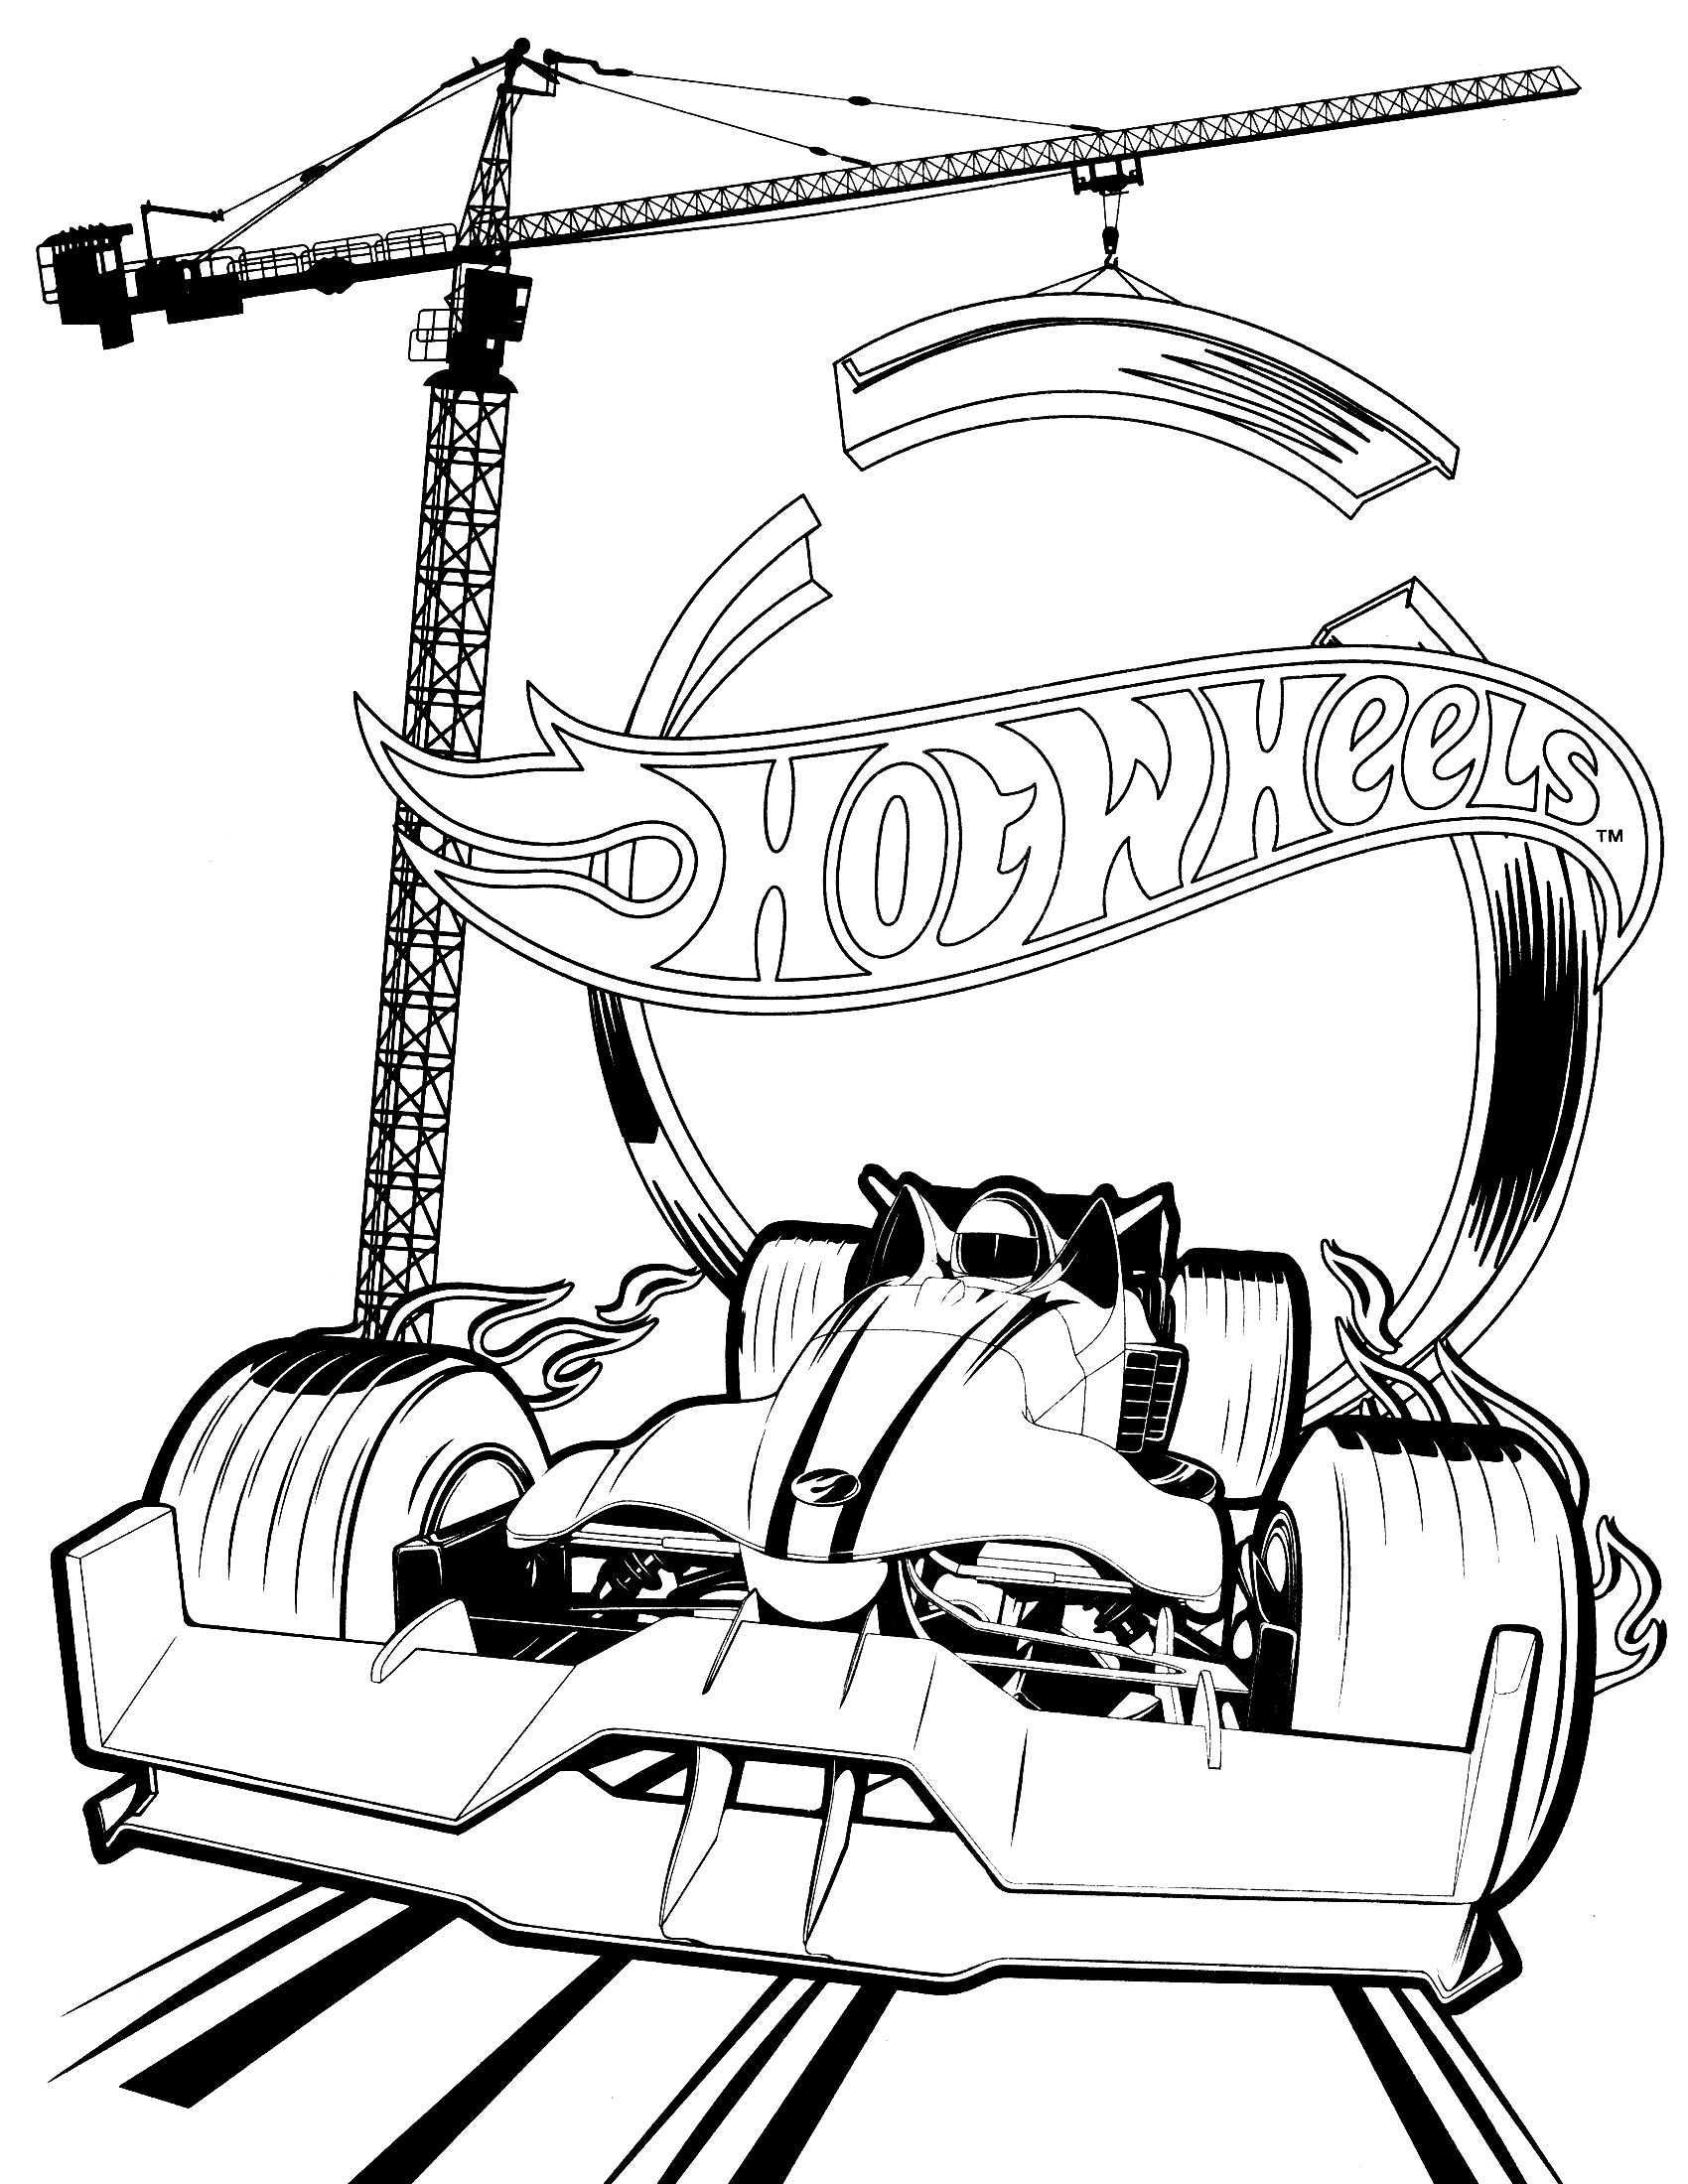 Team Hot Wheels Coloring Pages Coloring Page Cars Coloring Pages Race Car Coloring Pages Hot Wheels Birthday